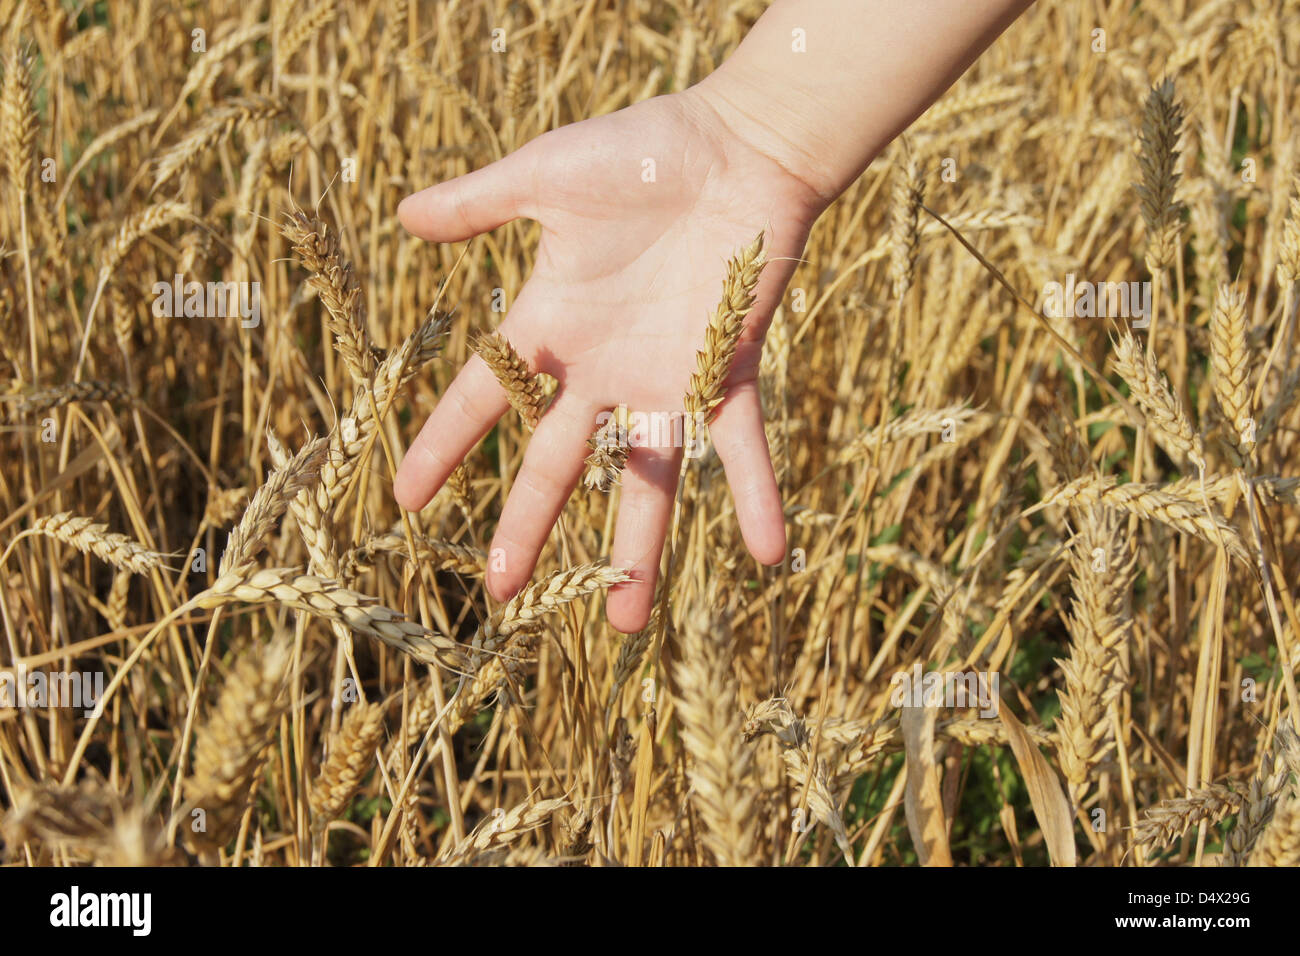 the hand of the person touches wheat cones in a big field in a sunny day Stock Photo